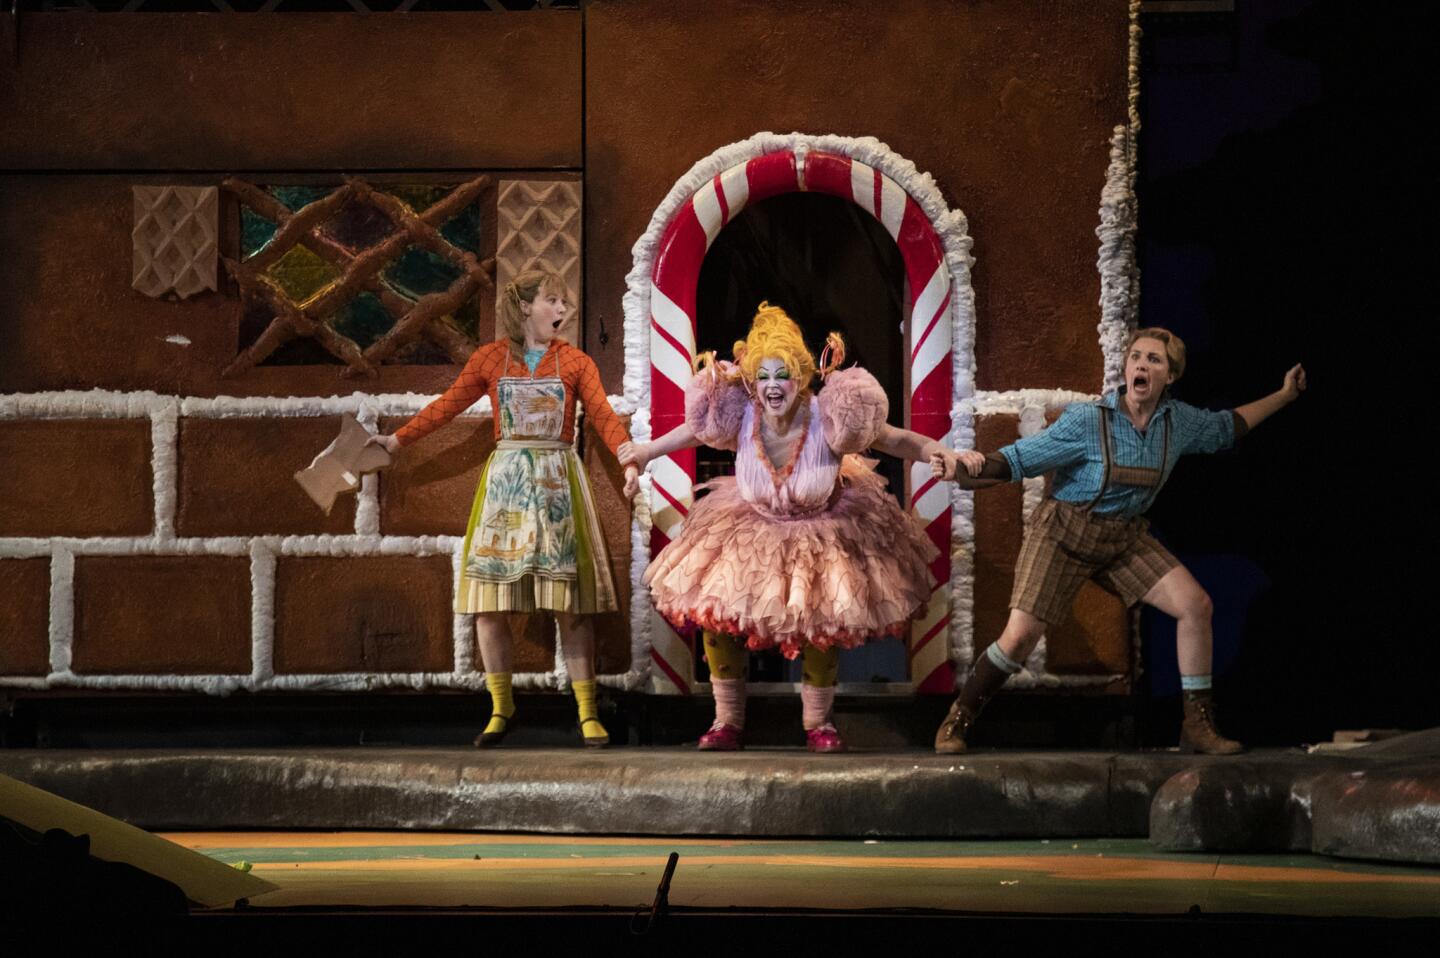 Hansel and Gretel, played by Sasha Cooke and Liv Redpath, are grabbed by the wicked witch, played by Susan Graham, at the Dorothy Chandler Pavilion in Los Angeles on Nov. 15, 2018.